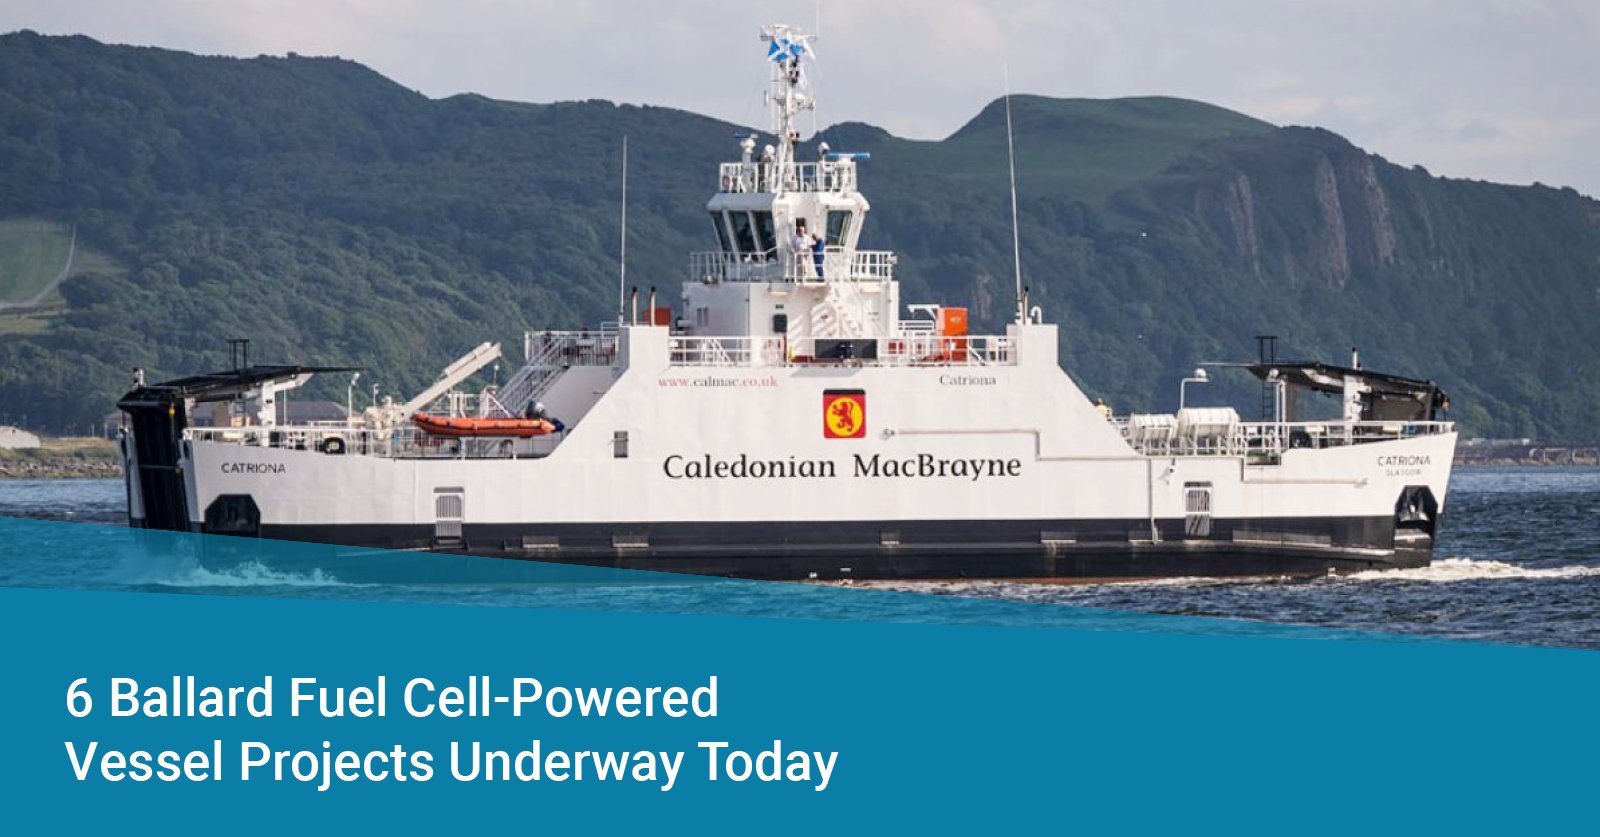 Fuel Cell-Powered Vessel Projects